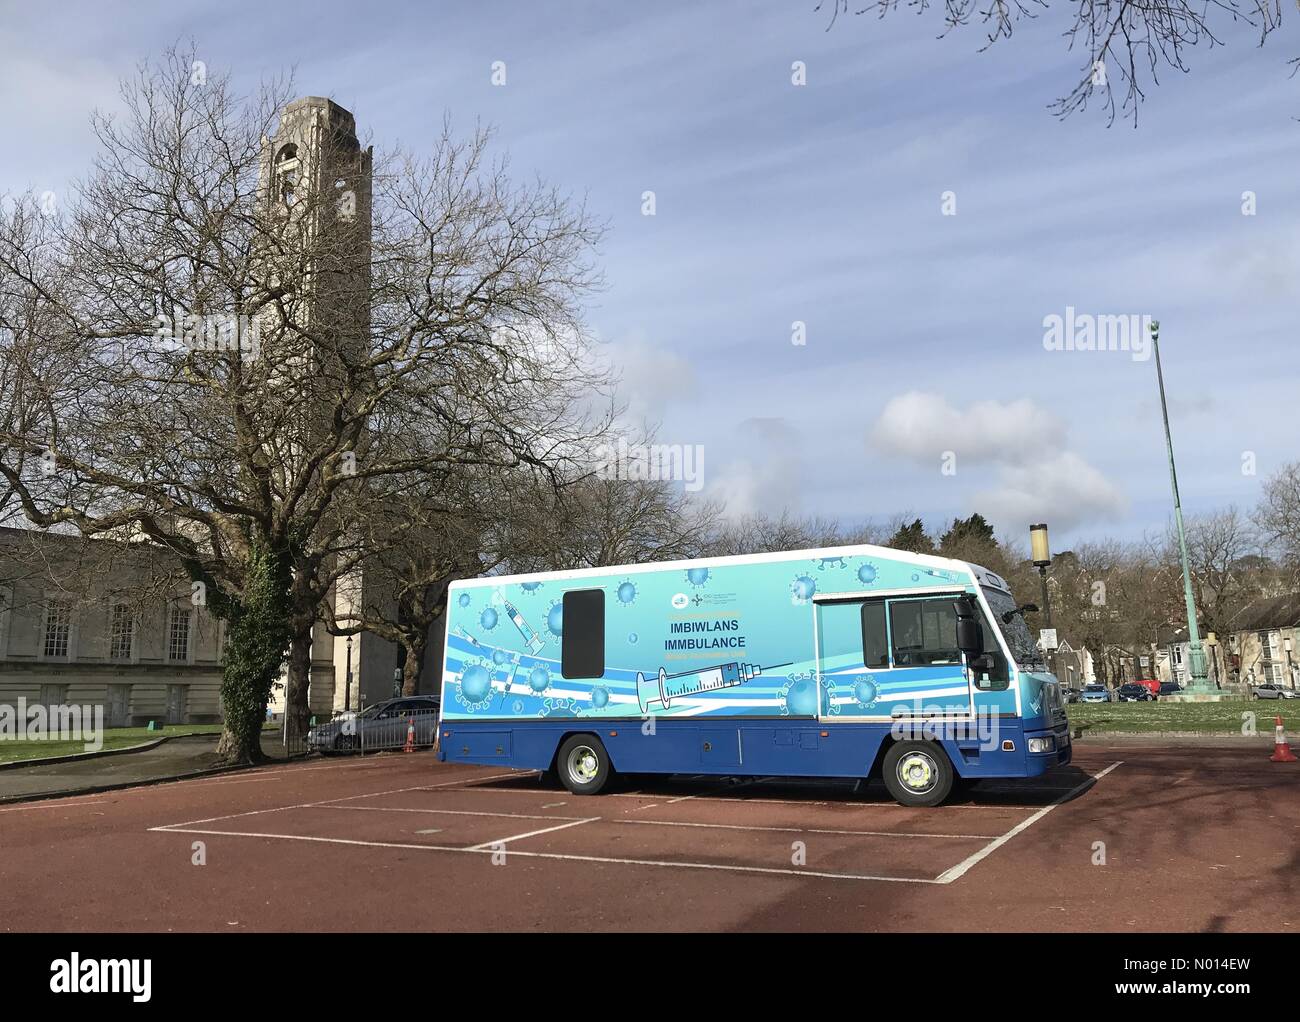 Mobile vaccination lorry parked outside the Guildhall in Swansea this morning. Credit: Phil Rees/StockimoNews/Alamy Live News Stock Photo